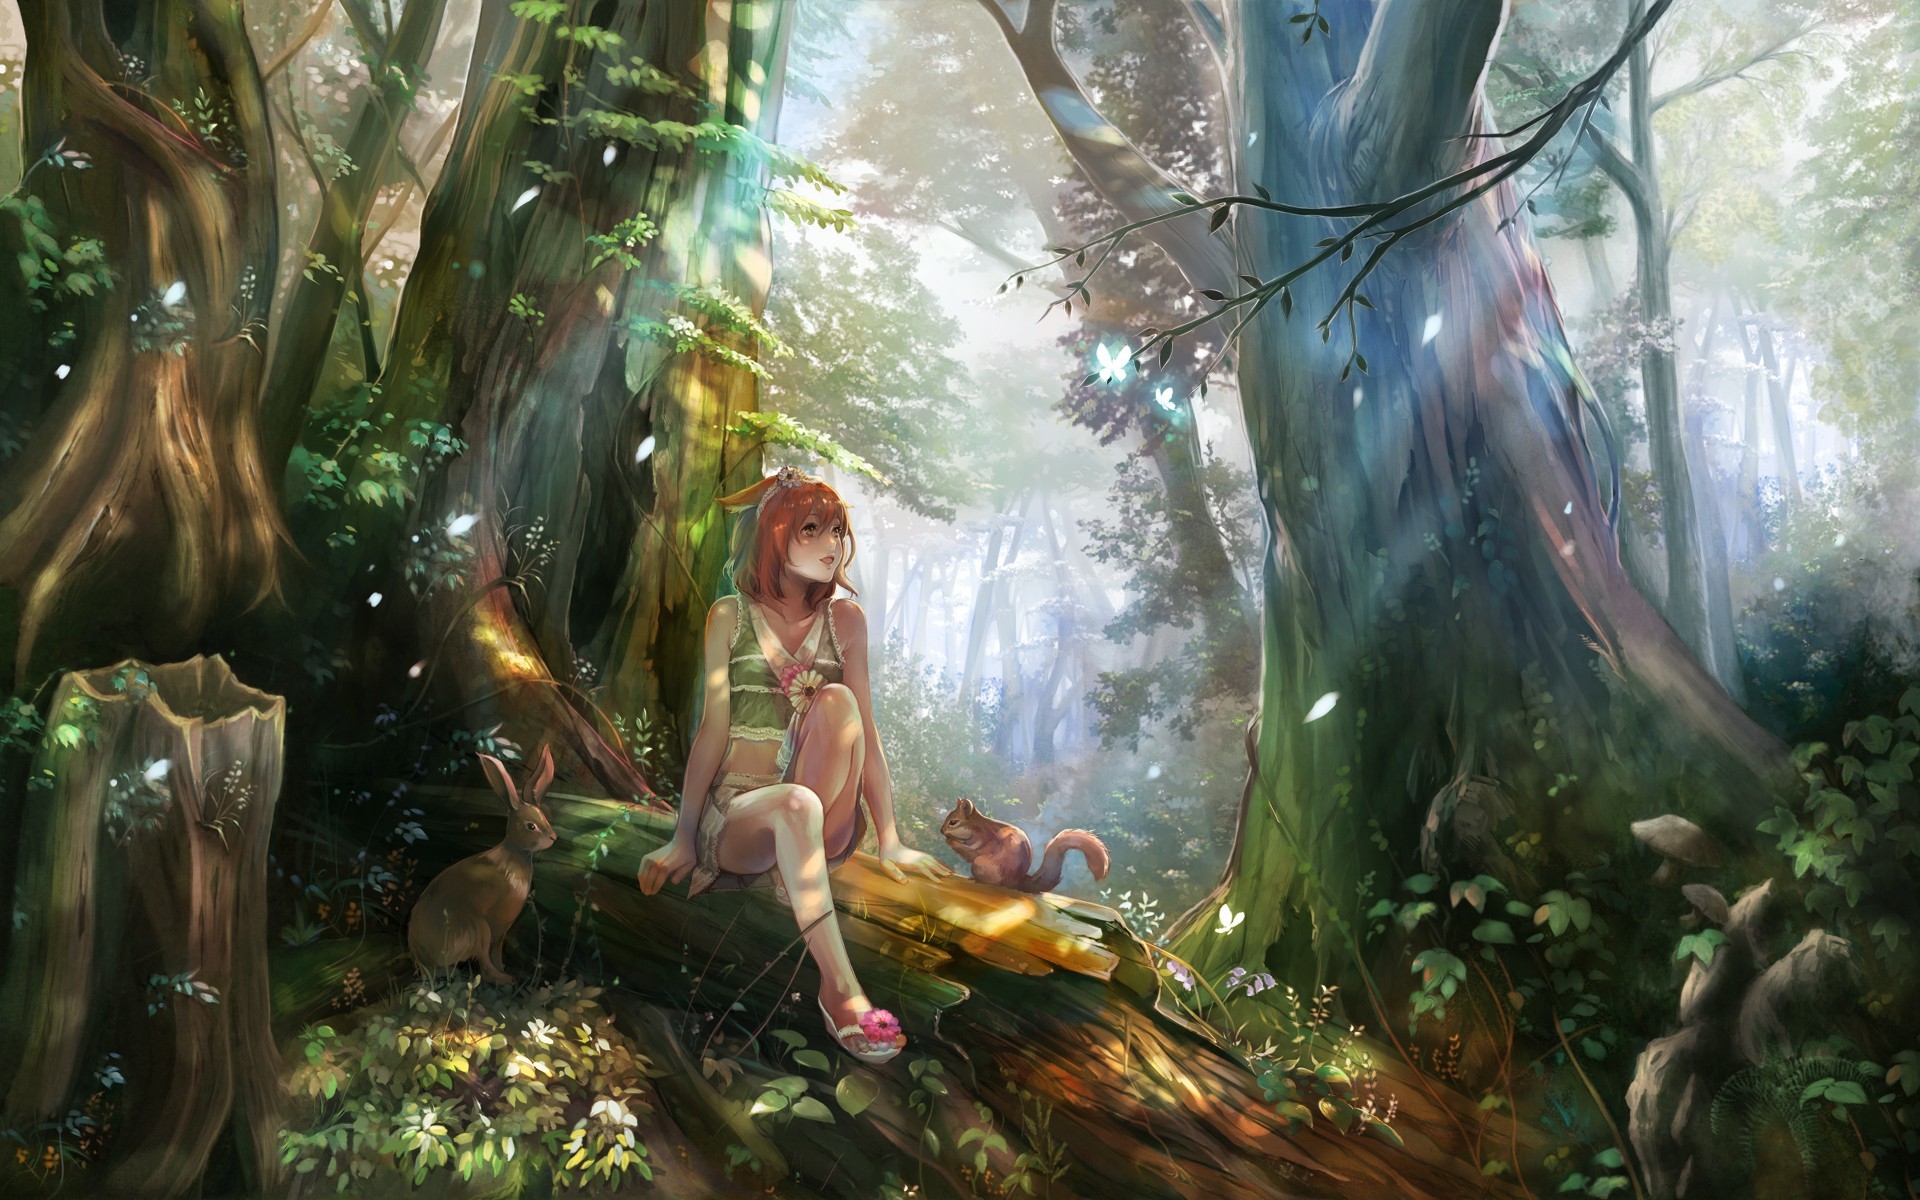 Anime Girls, Forest, Nature, Fantasy Art, Forest Clearing 